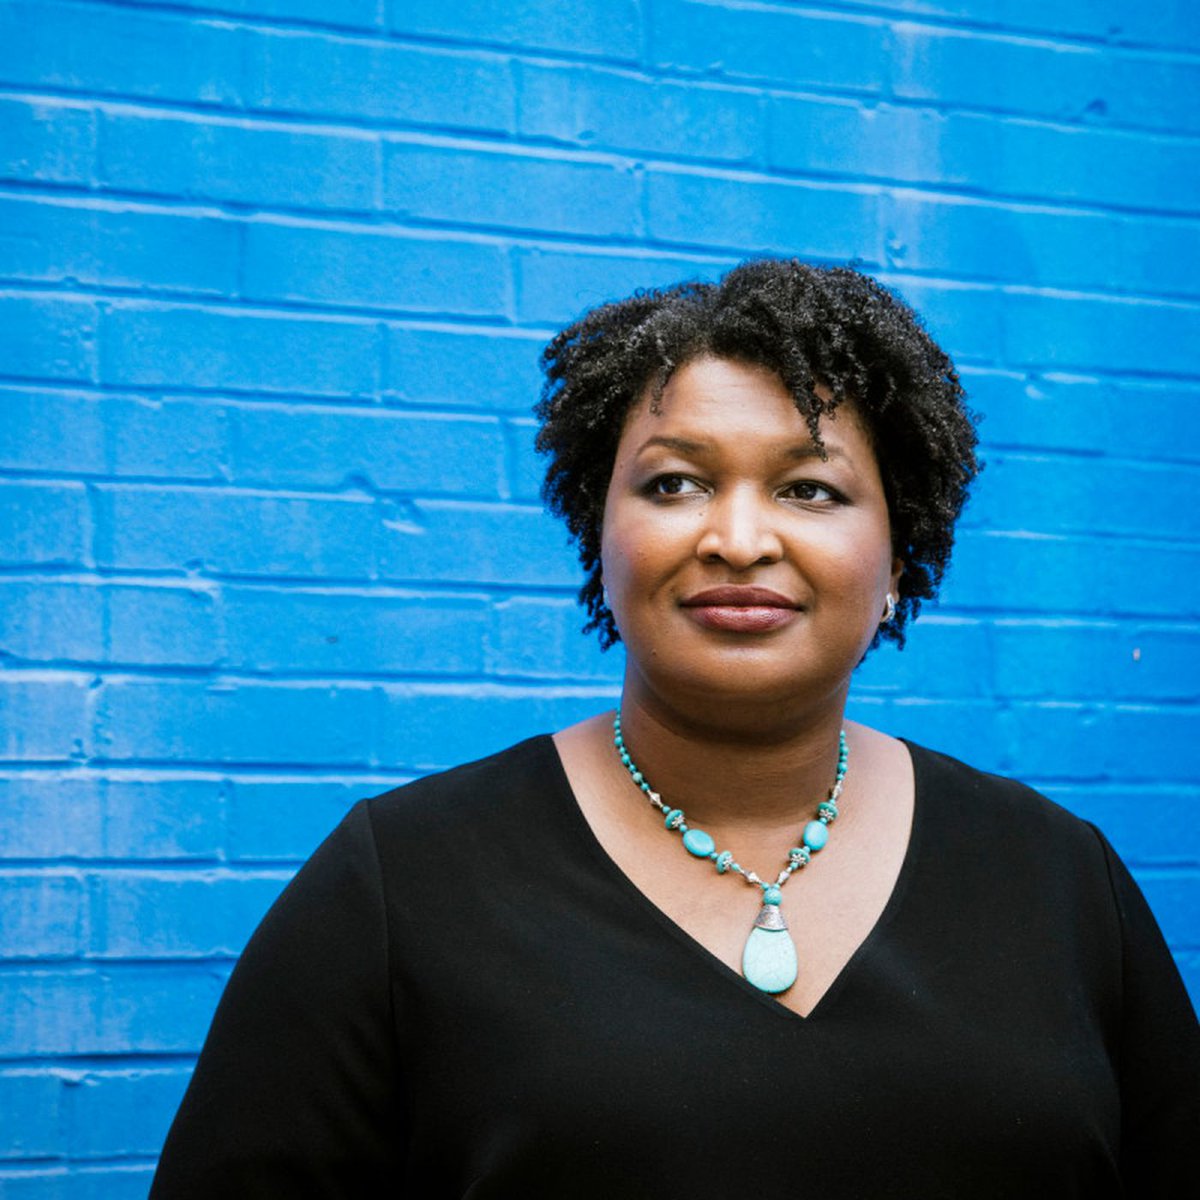 Of course, Stacy Abrams! Can anyone think of more natural politicians?